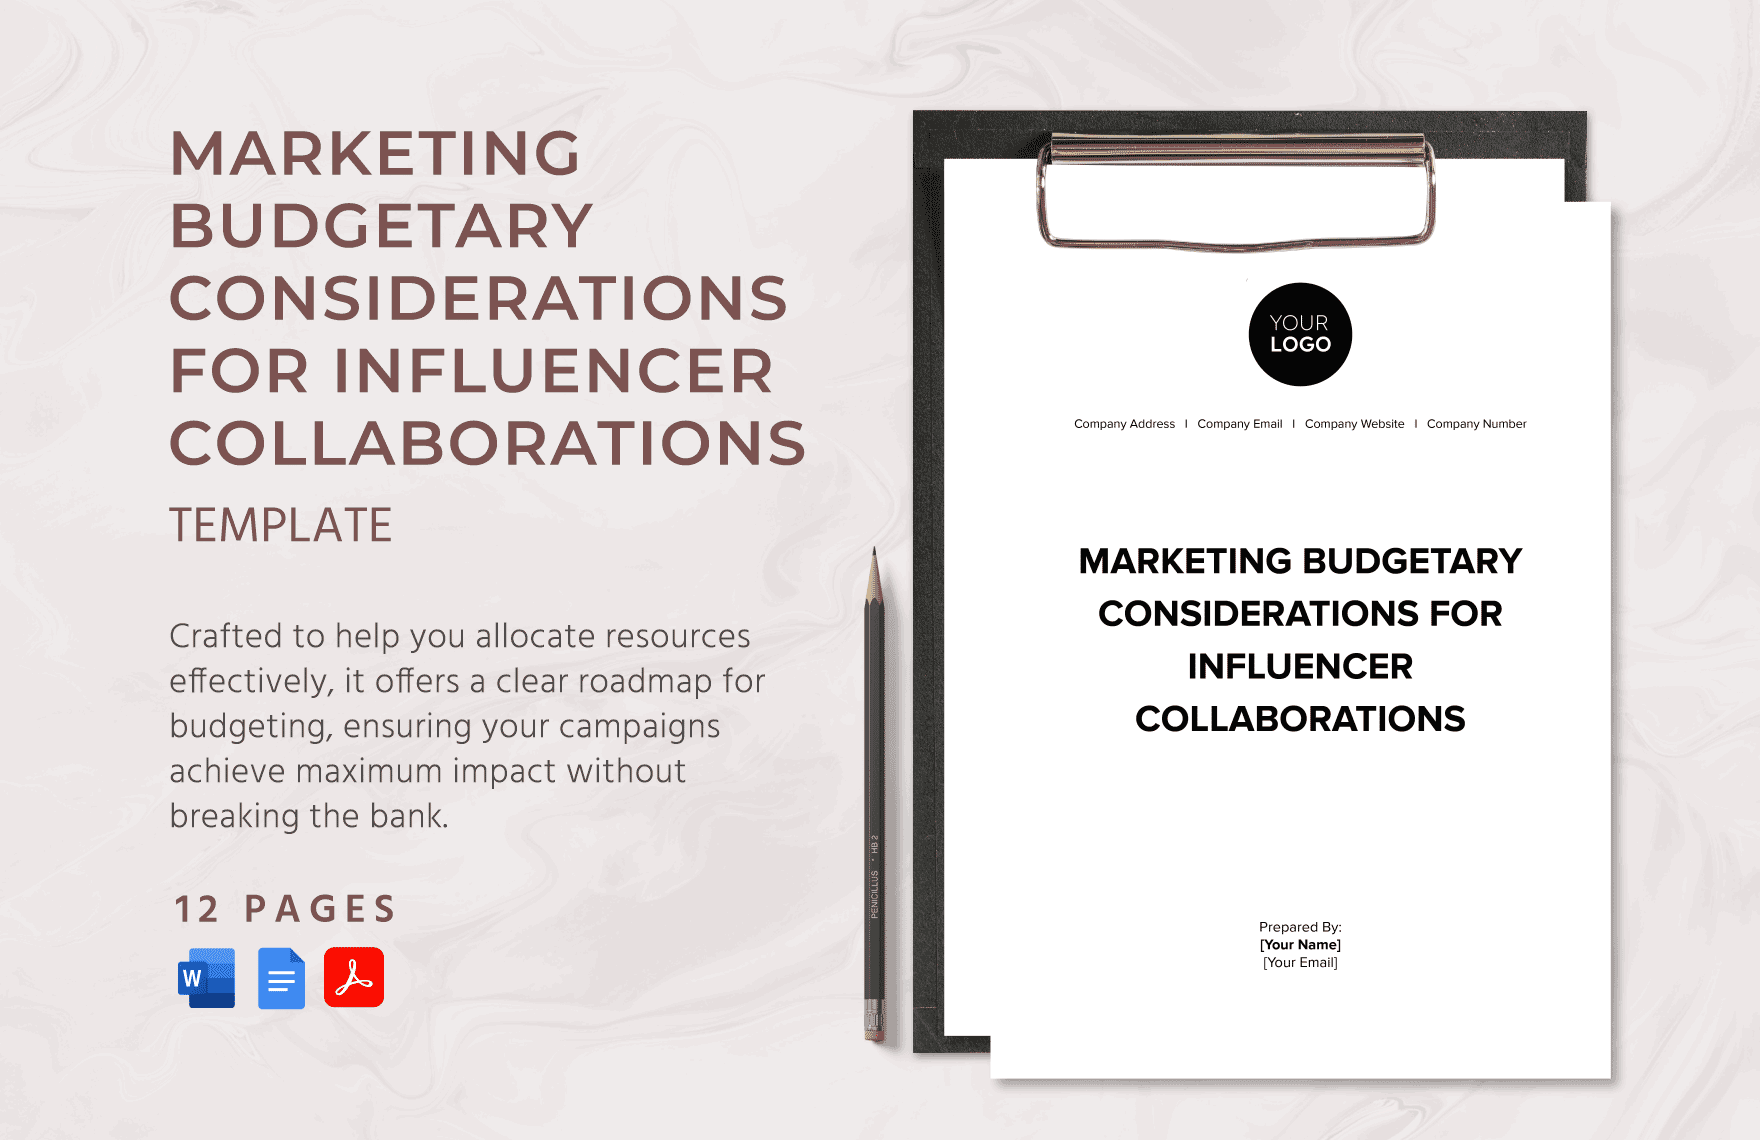 Marketing Budgetary Considerations for Influencer Collaborations Template